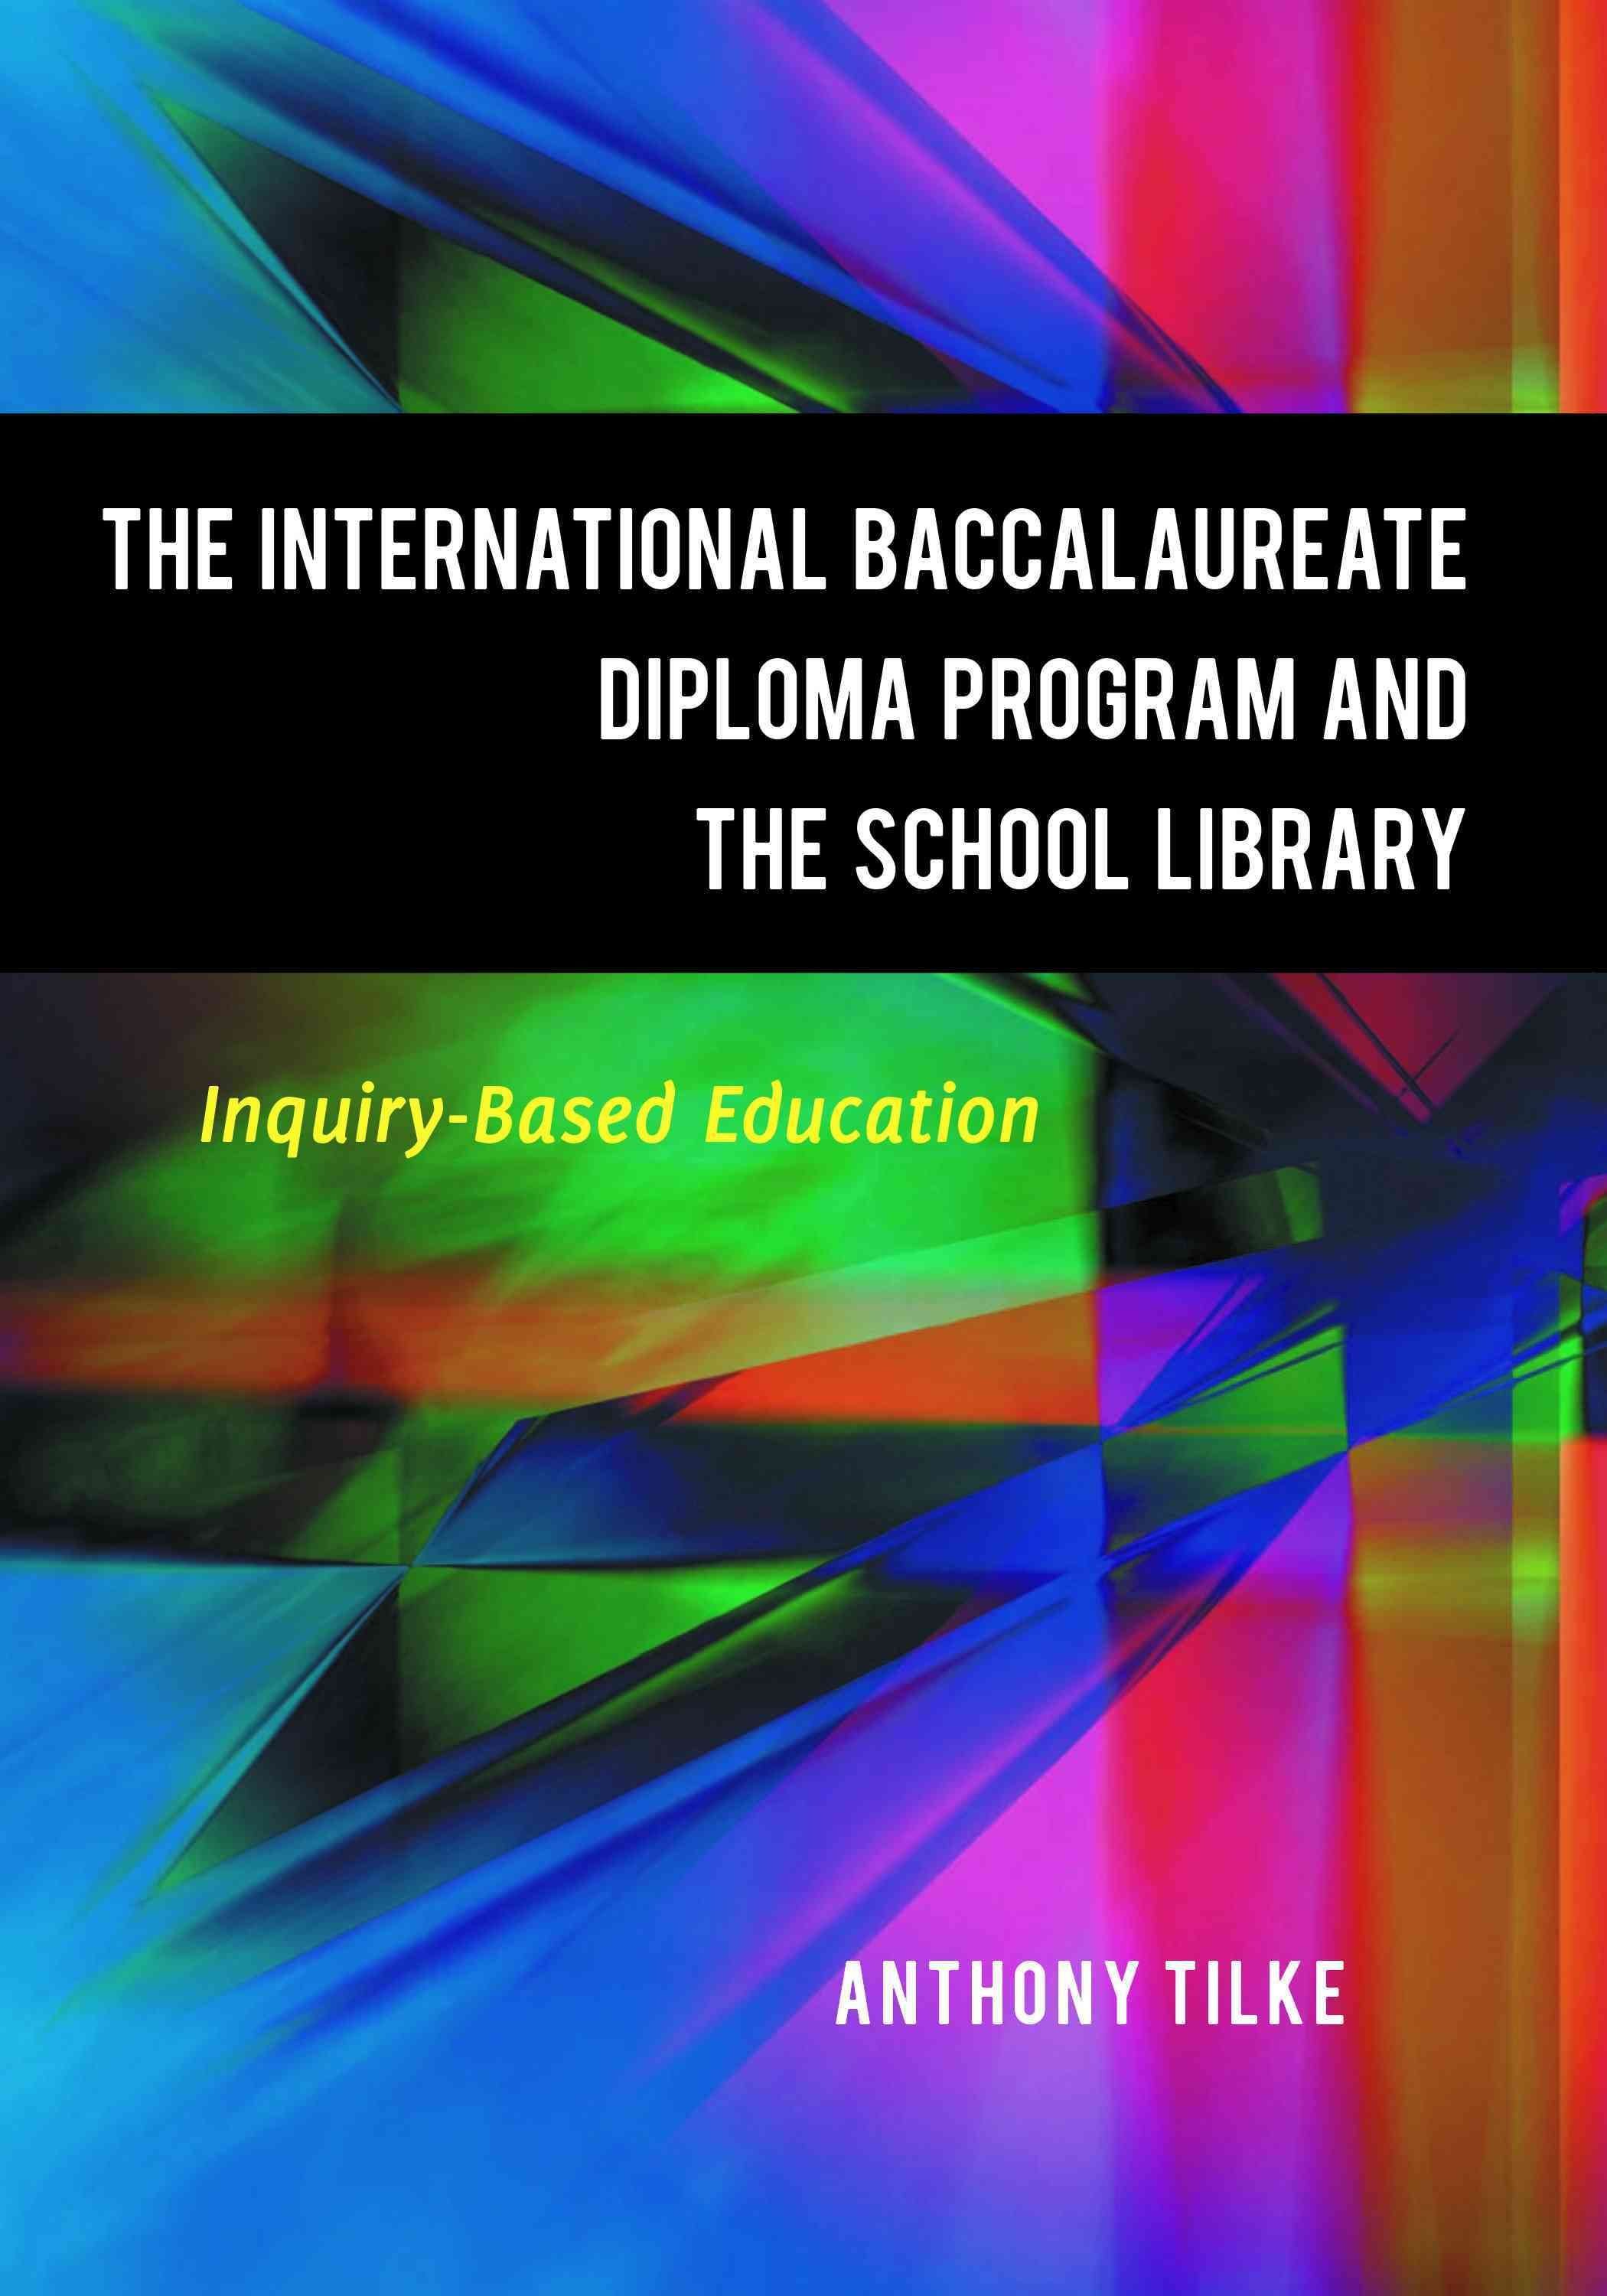 The International Baccalaureate Diploma Program and the School Library